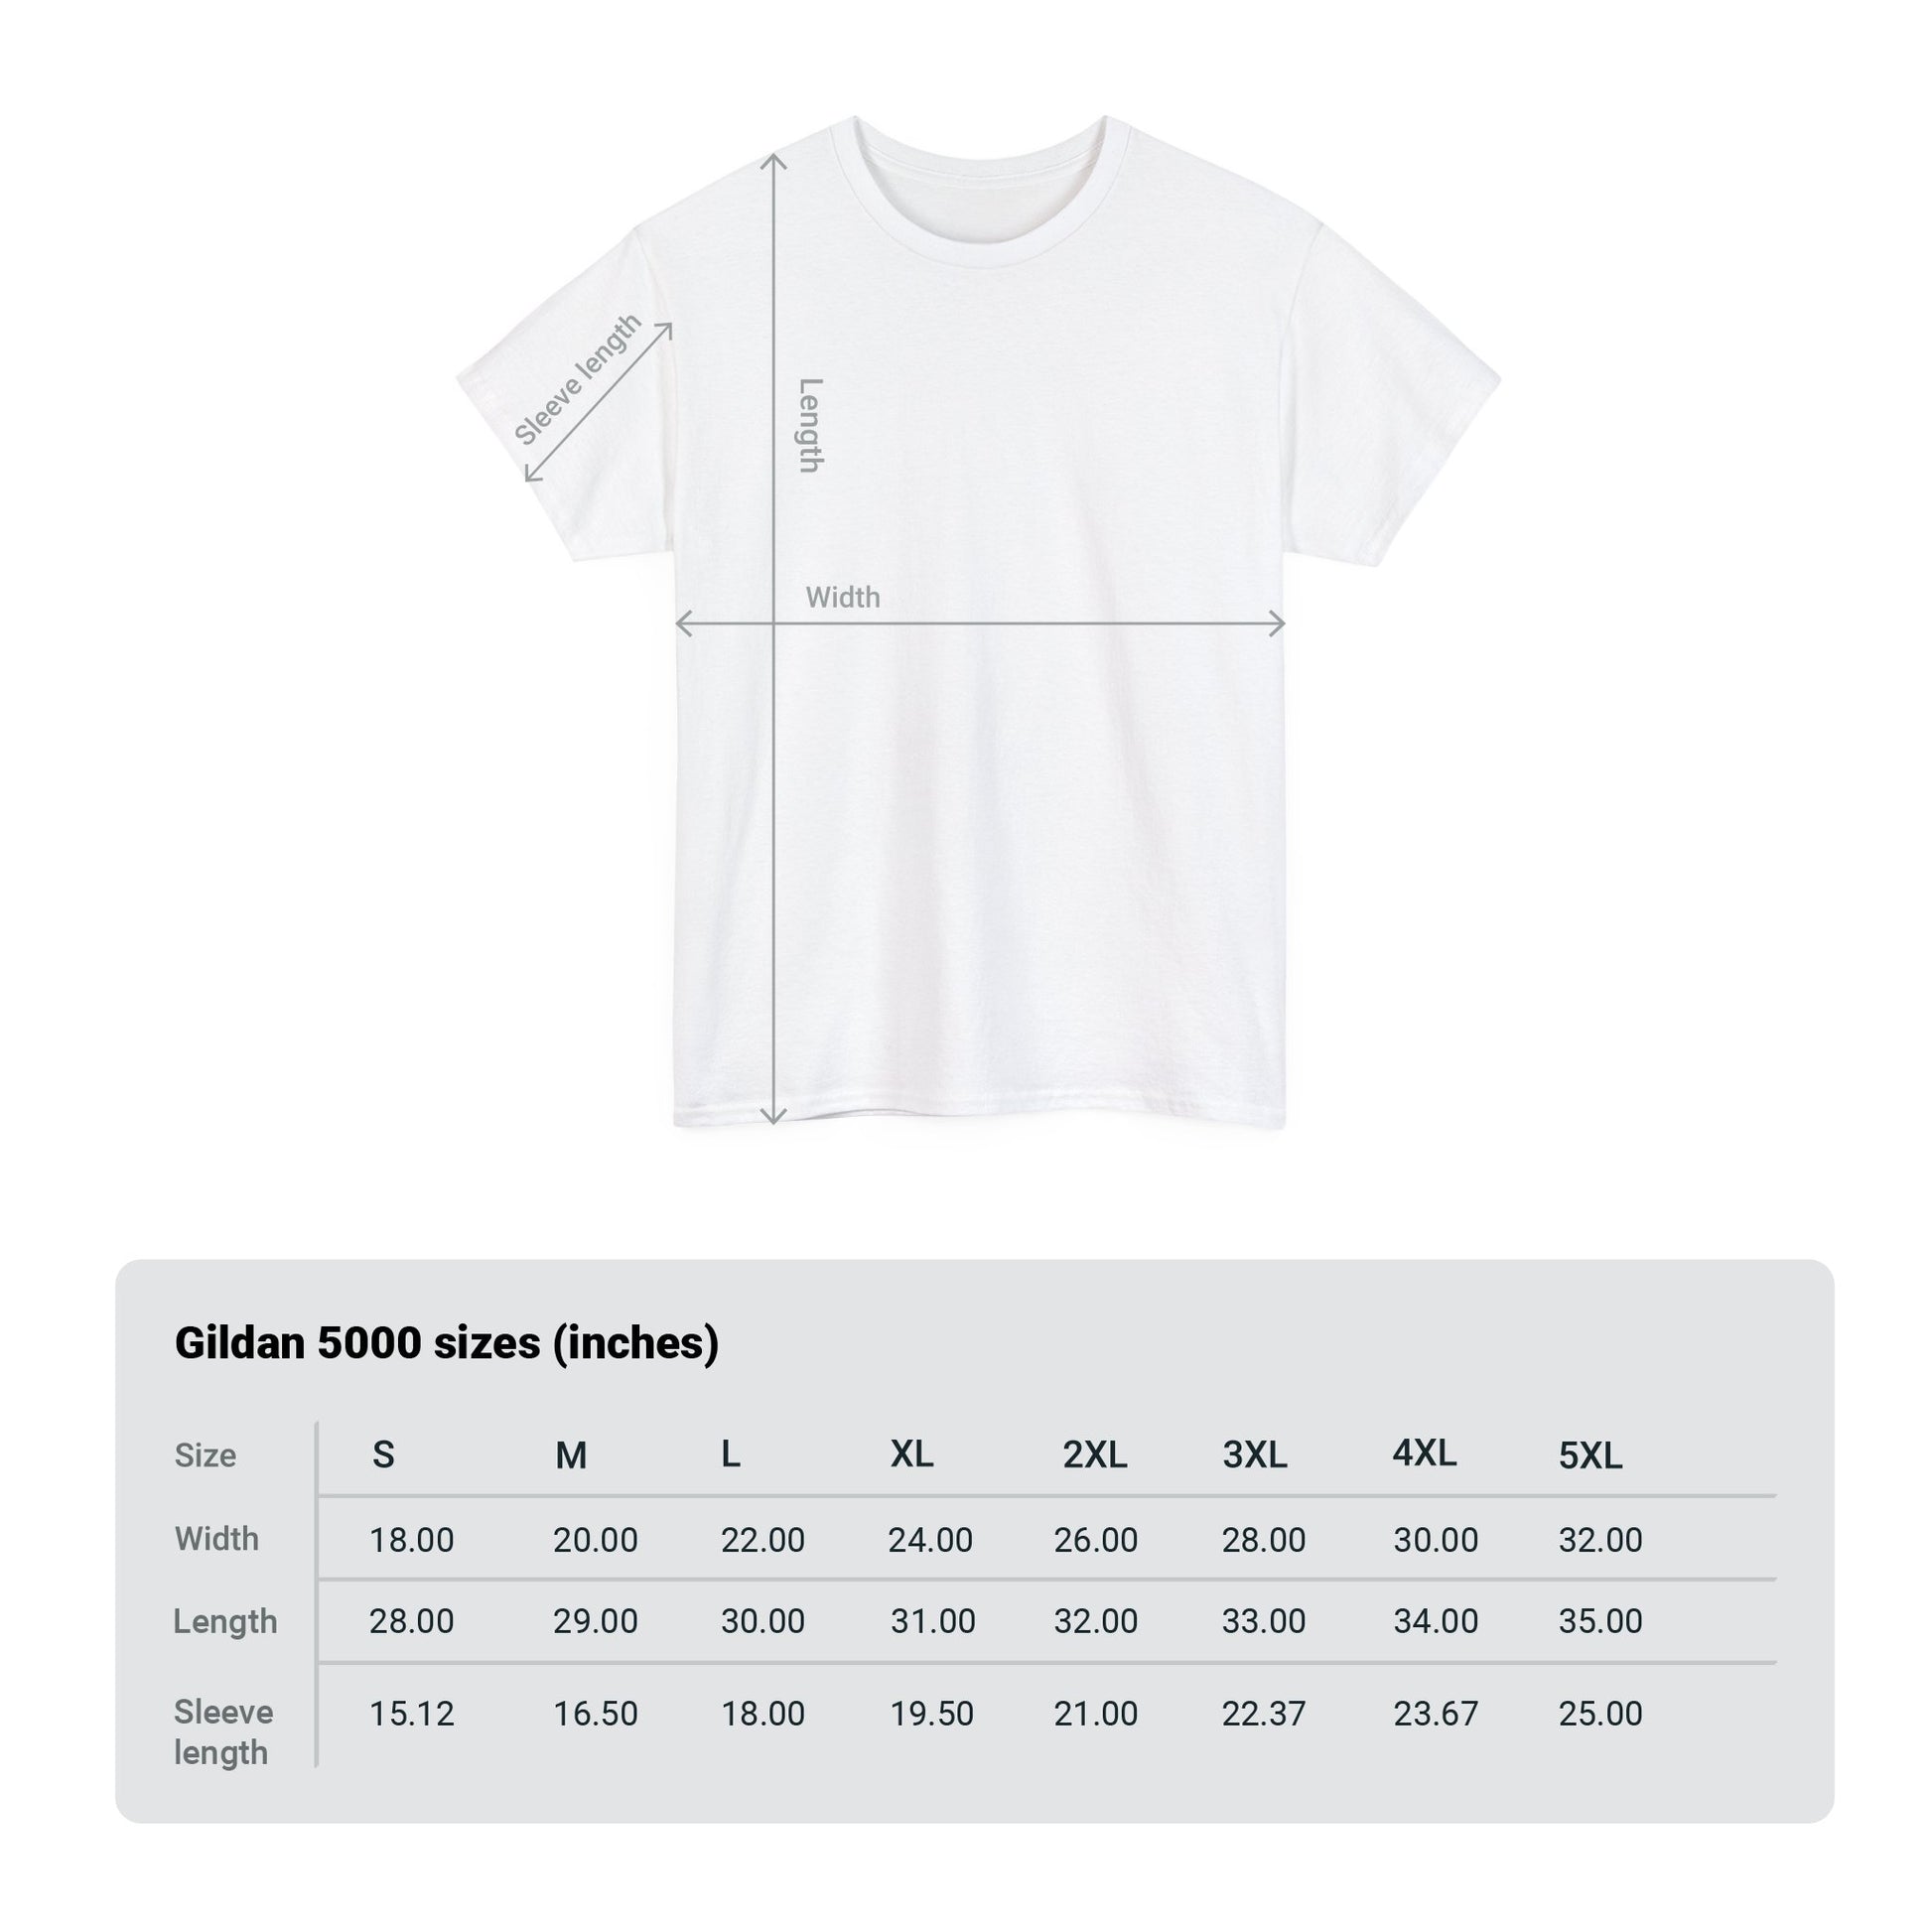 This image includes measurement marks and sizing table for the Gildan 5000 shirt sizes.